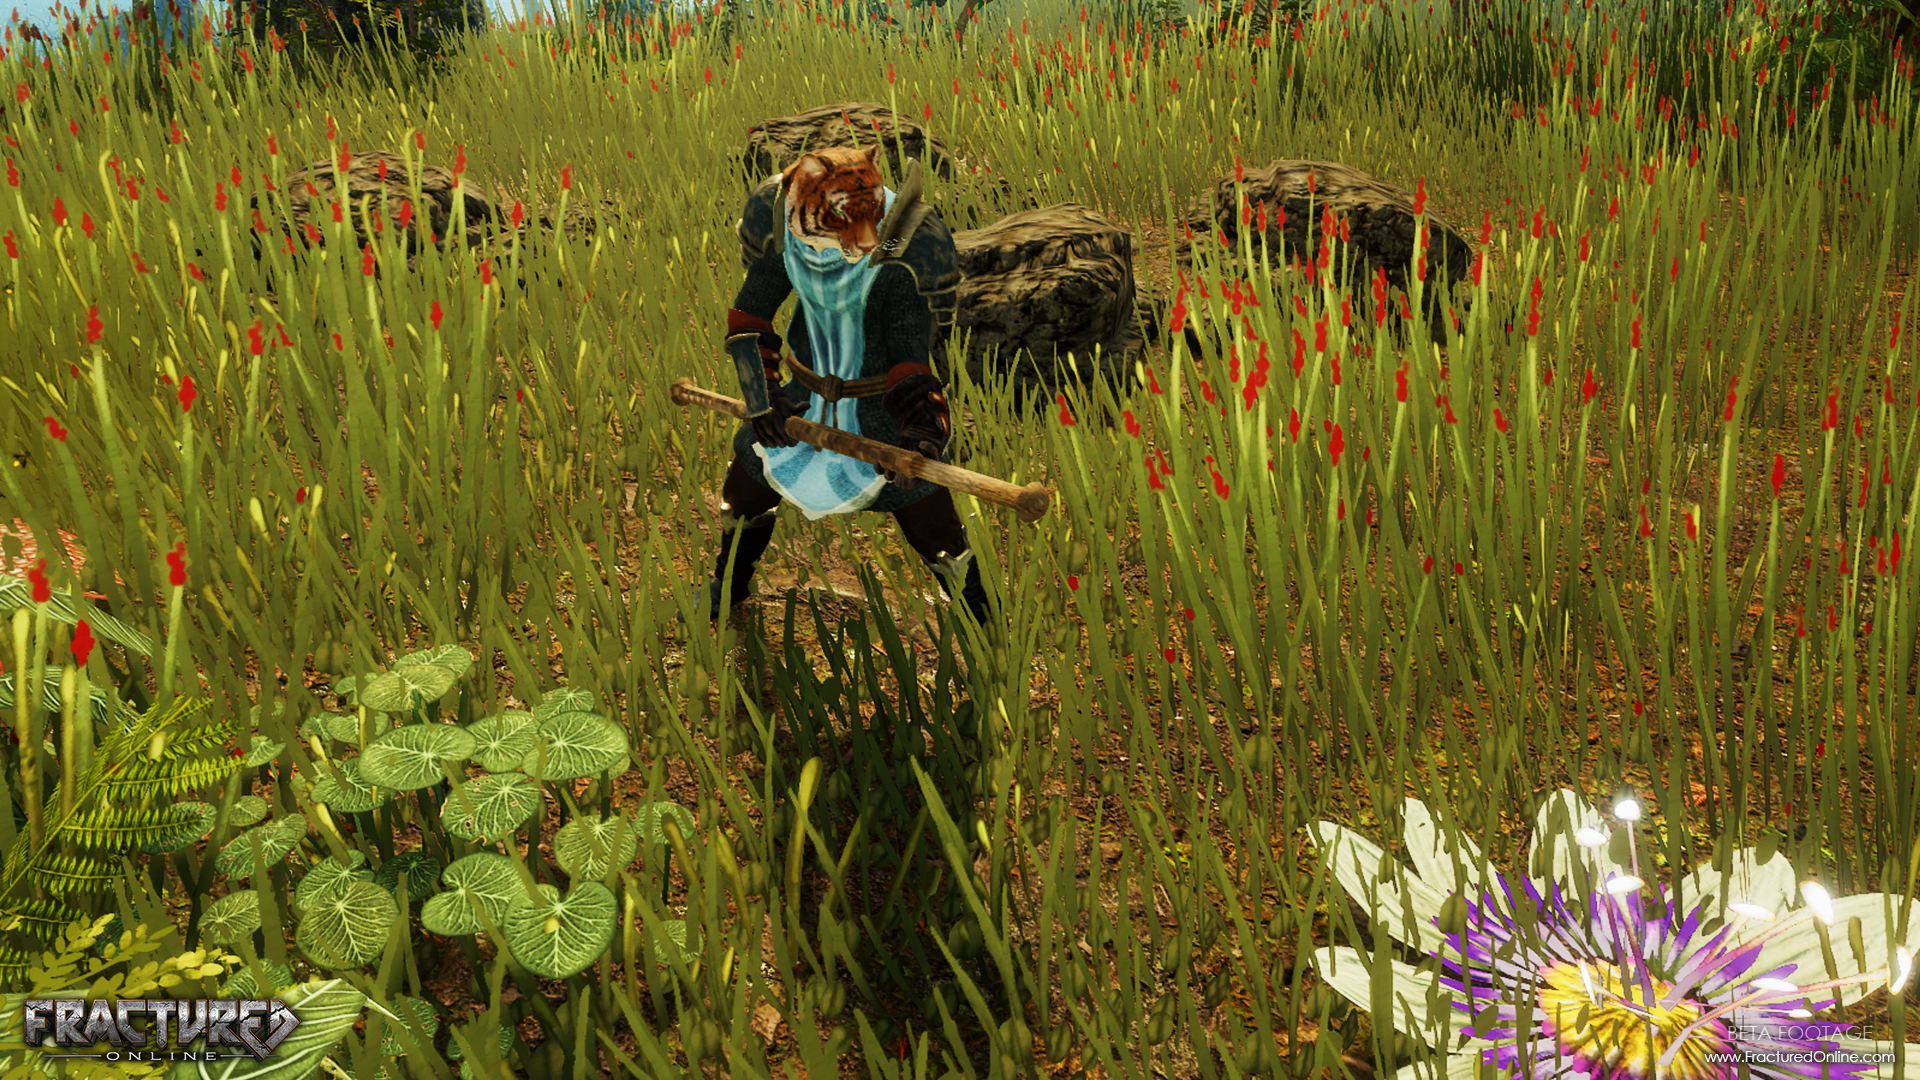 Fractured Previews the Half-Animal Wildfolk Race in Anticipation of Early Access